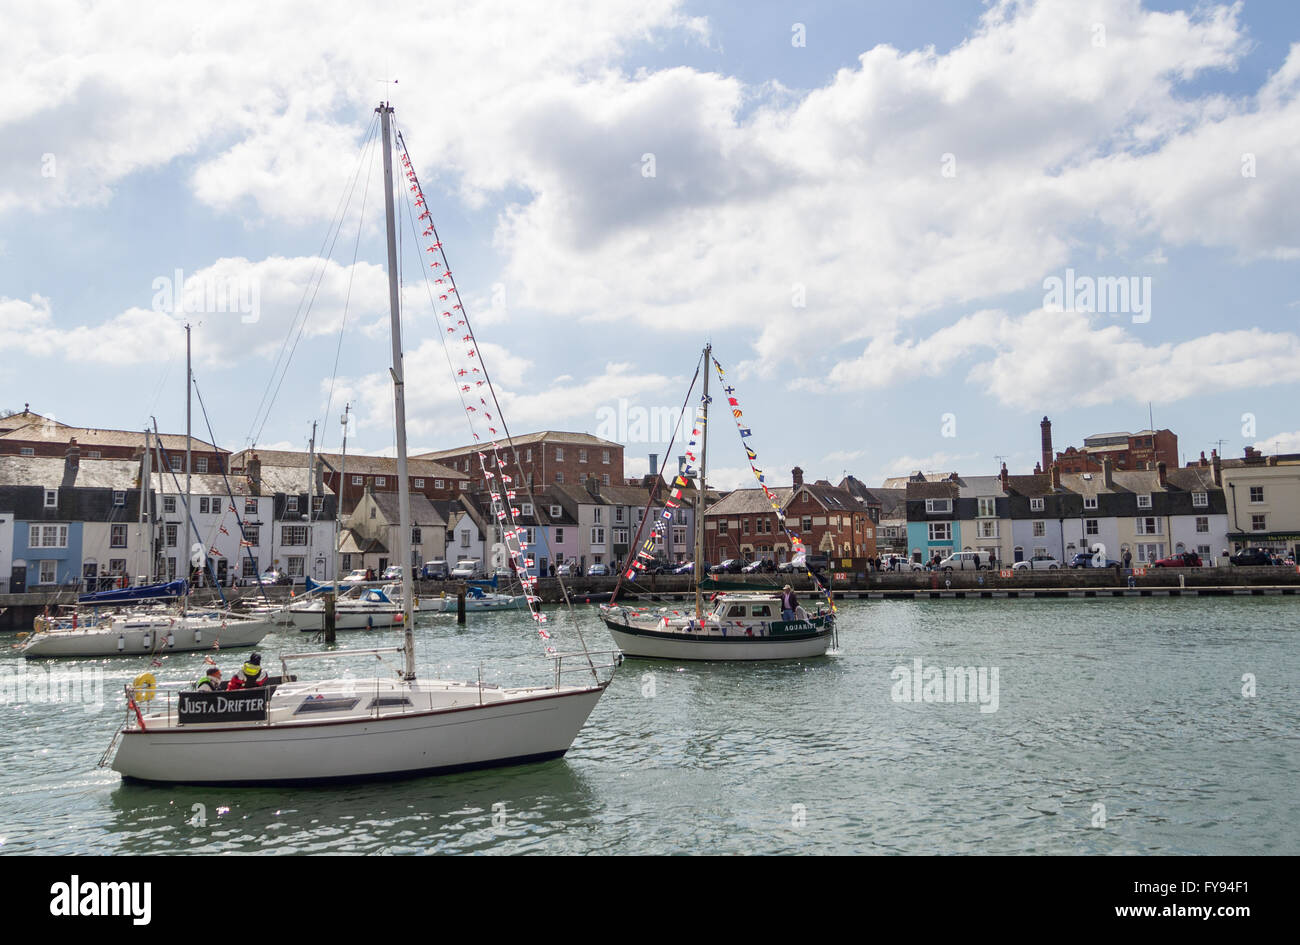 Weymouth, England. 23 April 2016. Queen's 90th Birthday Floating Tribute. Just a Drifter and another boat, decked with flags. Credit:  Frances Underwood/Alamy Live News Stock Photo